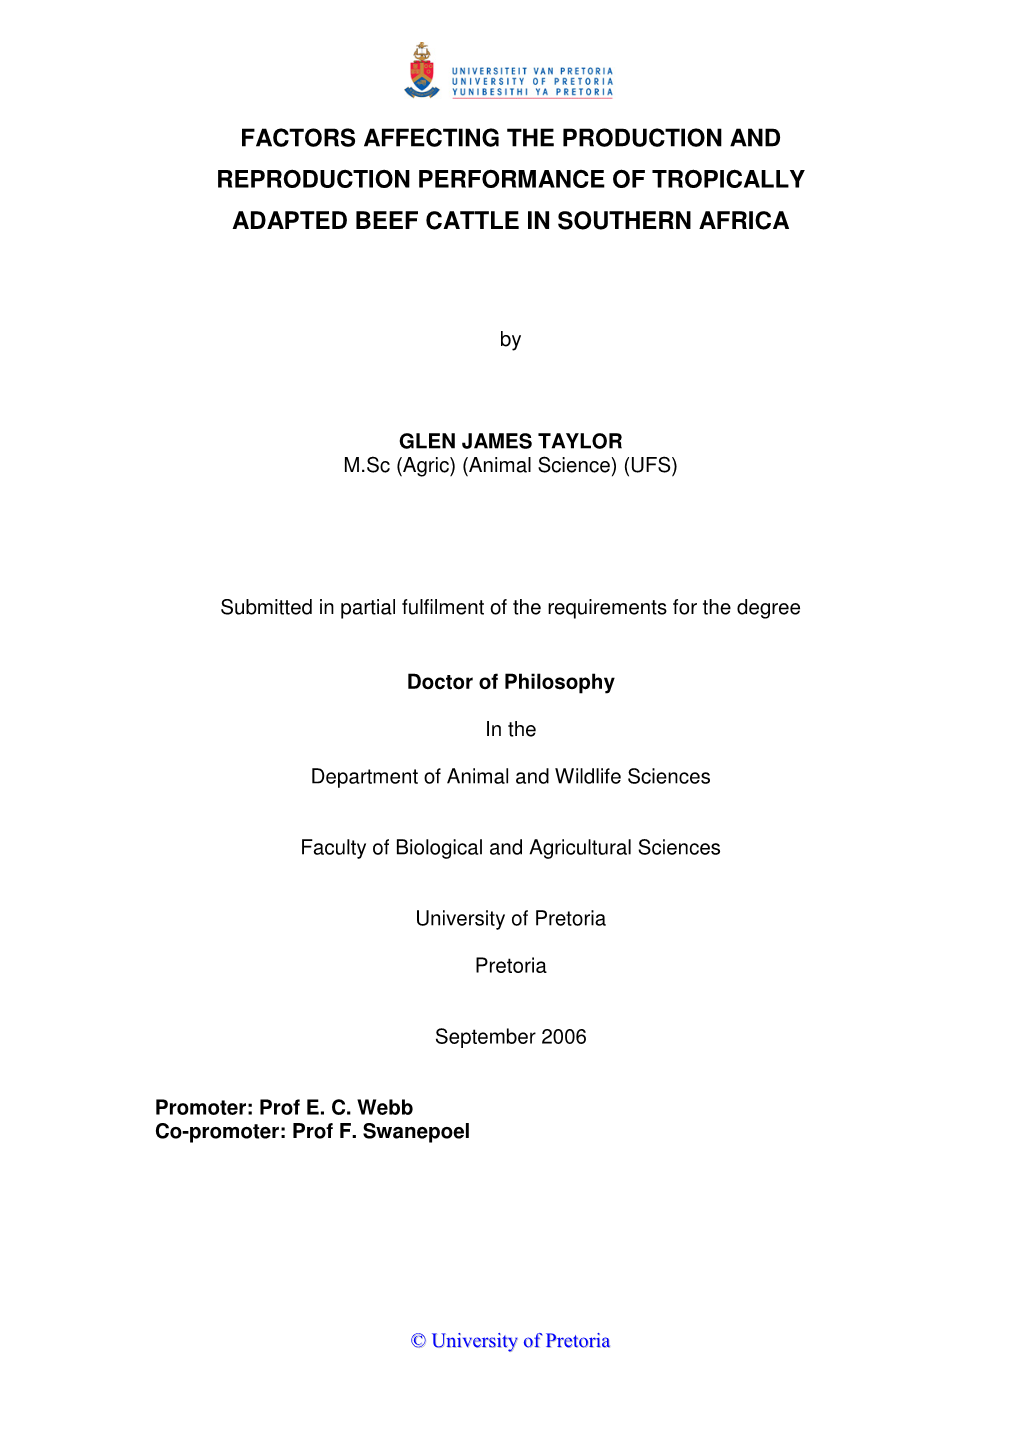 Factors Affecting the Production and Reproduction Performance of Tropically Adapted Beef Cattle in Southern Africa